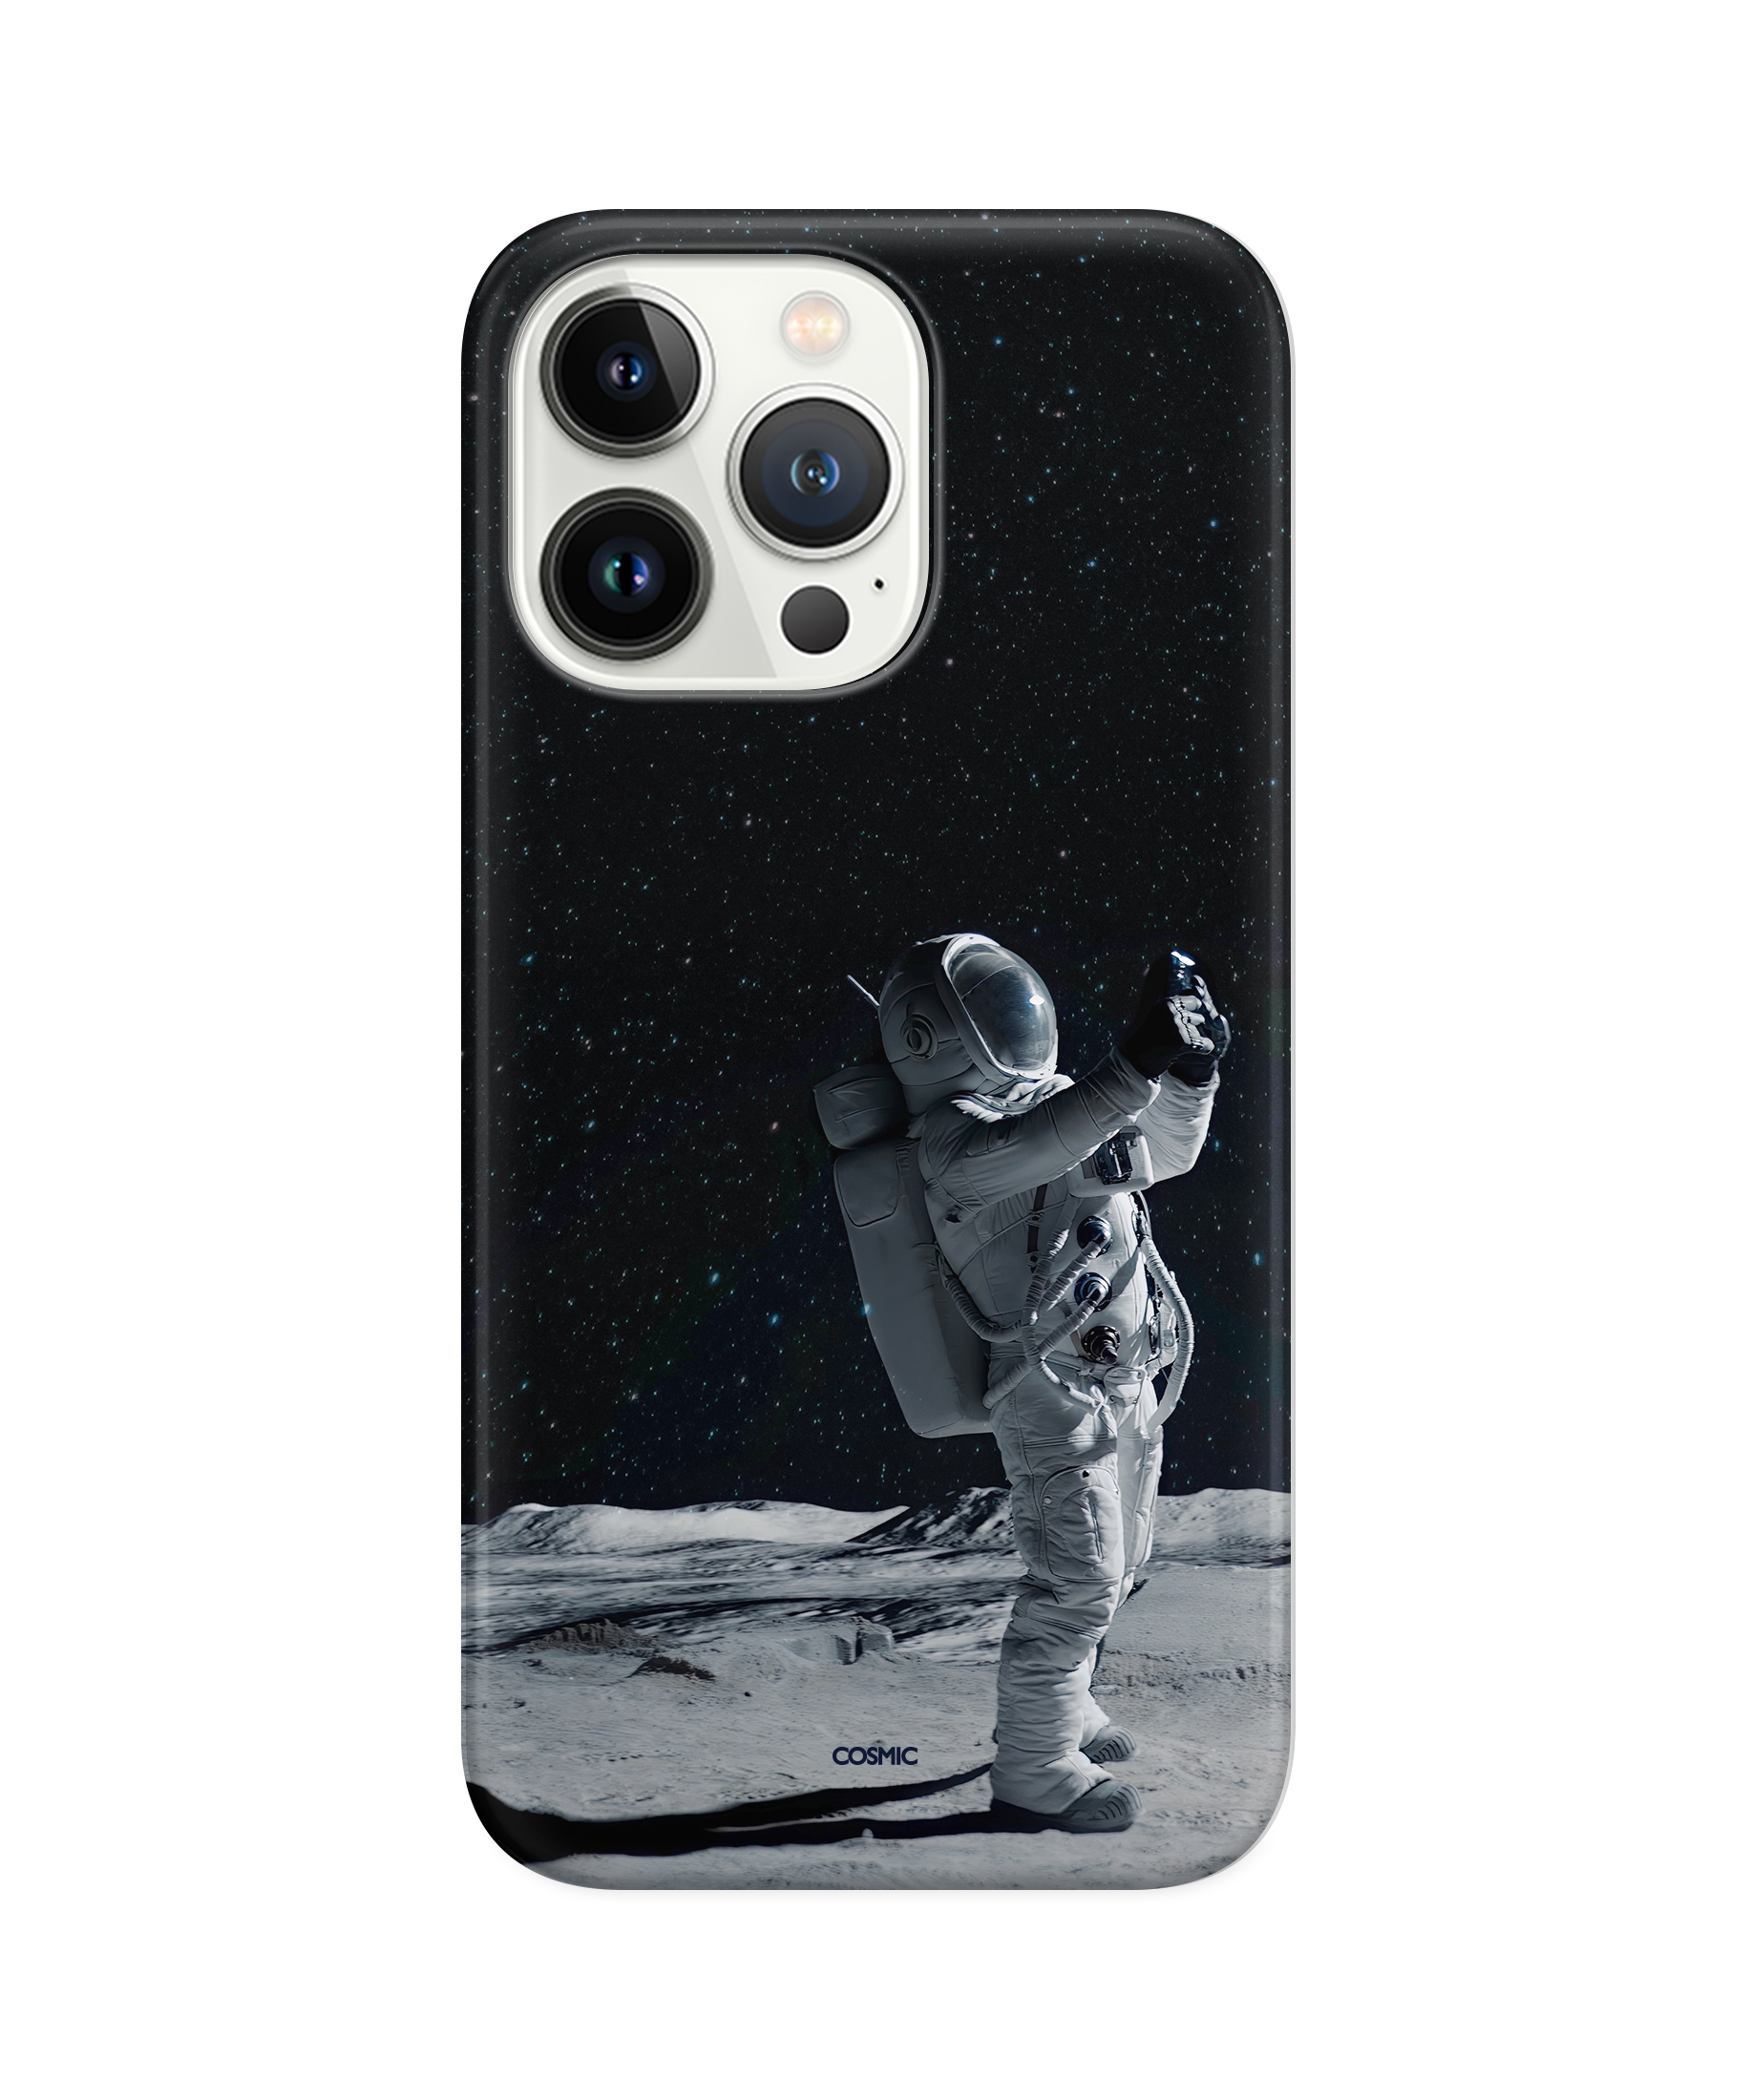 [PHONE CASE] taking a selfie on the moon 하드 케이스